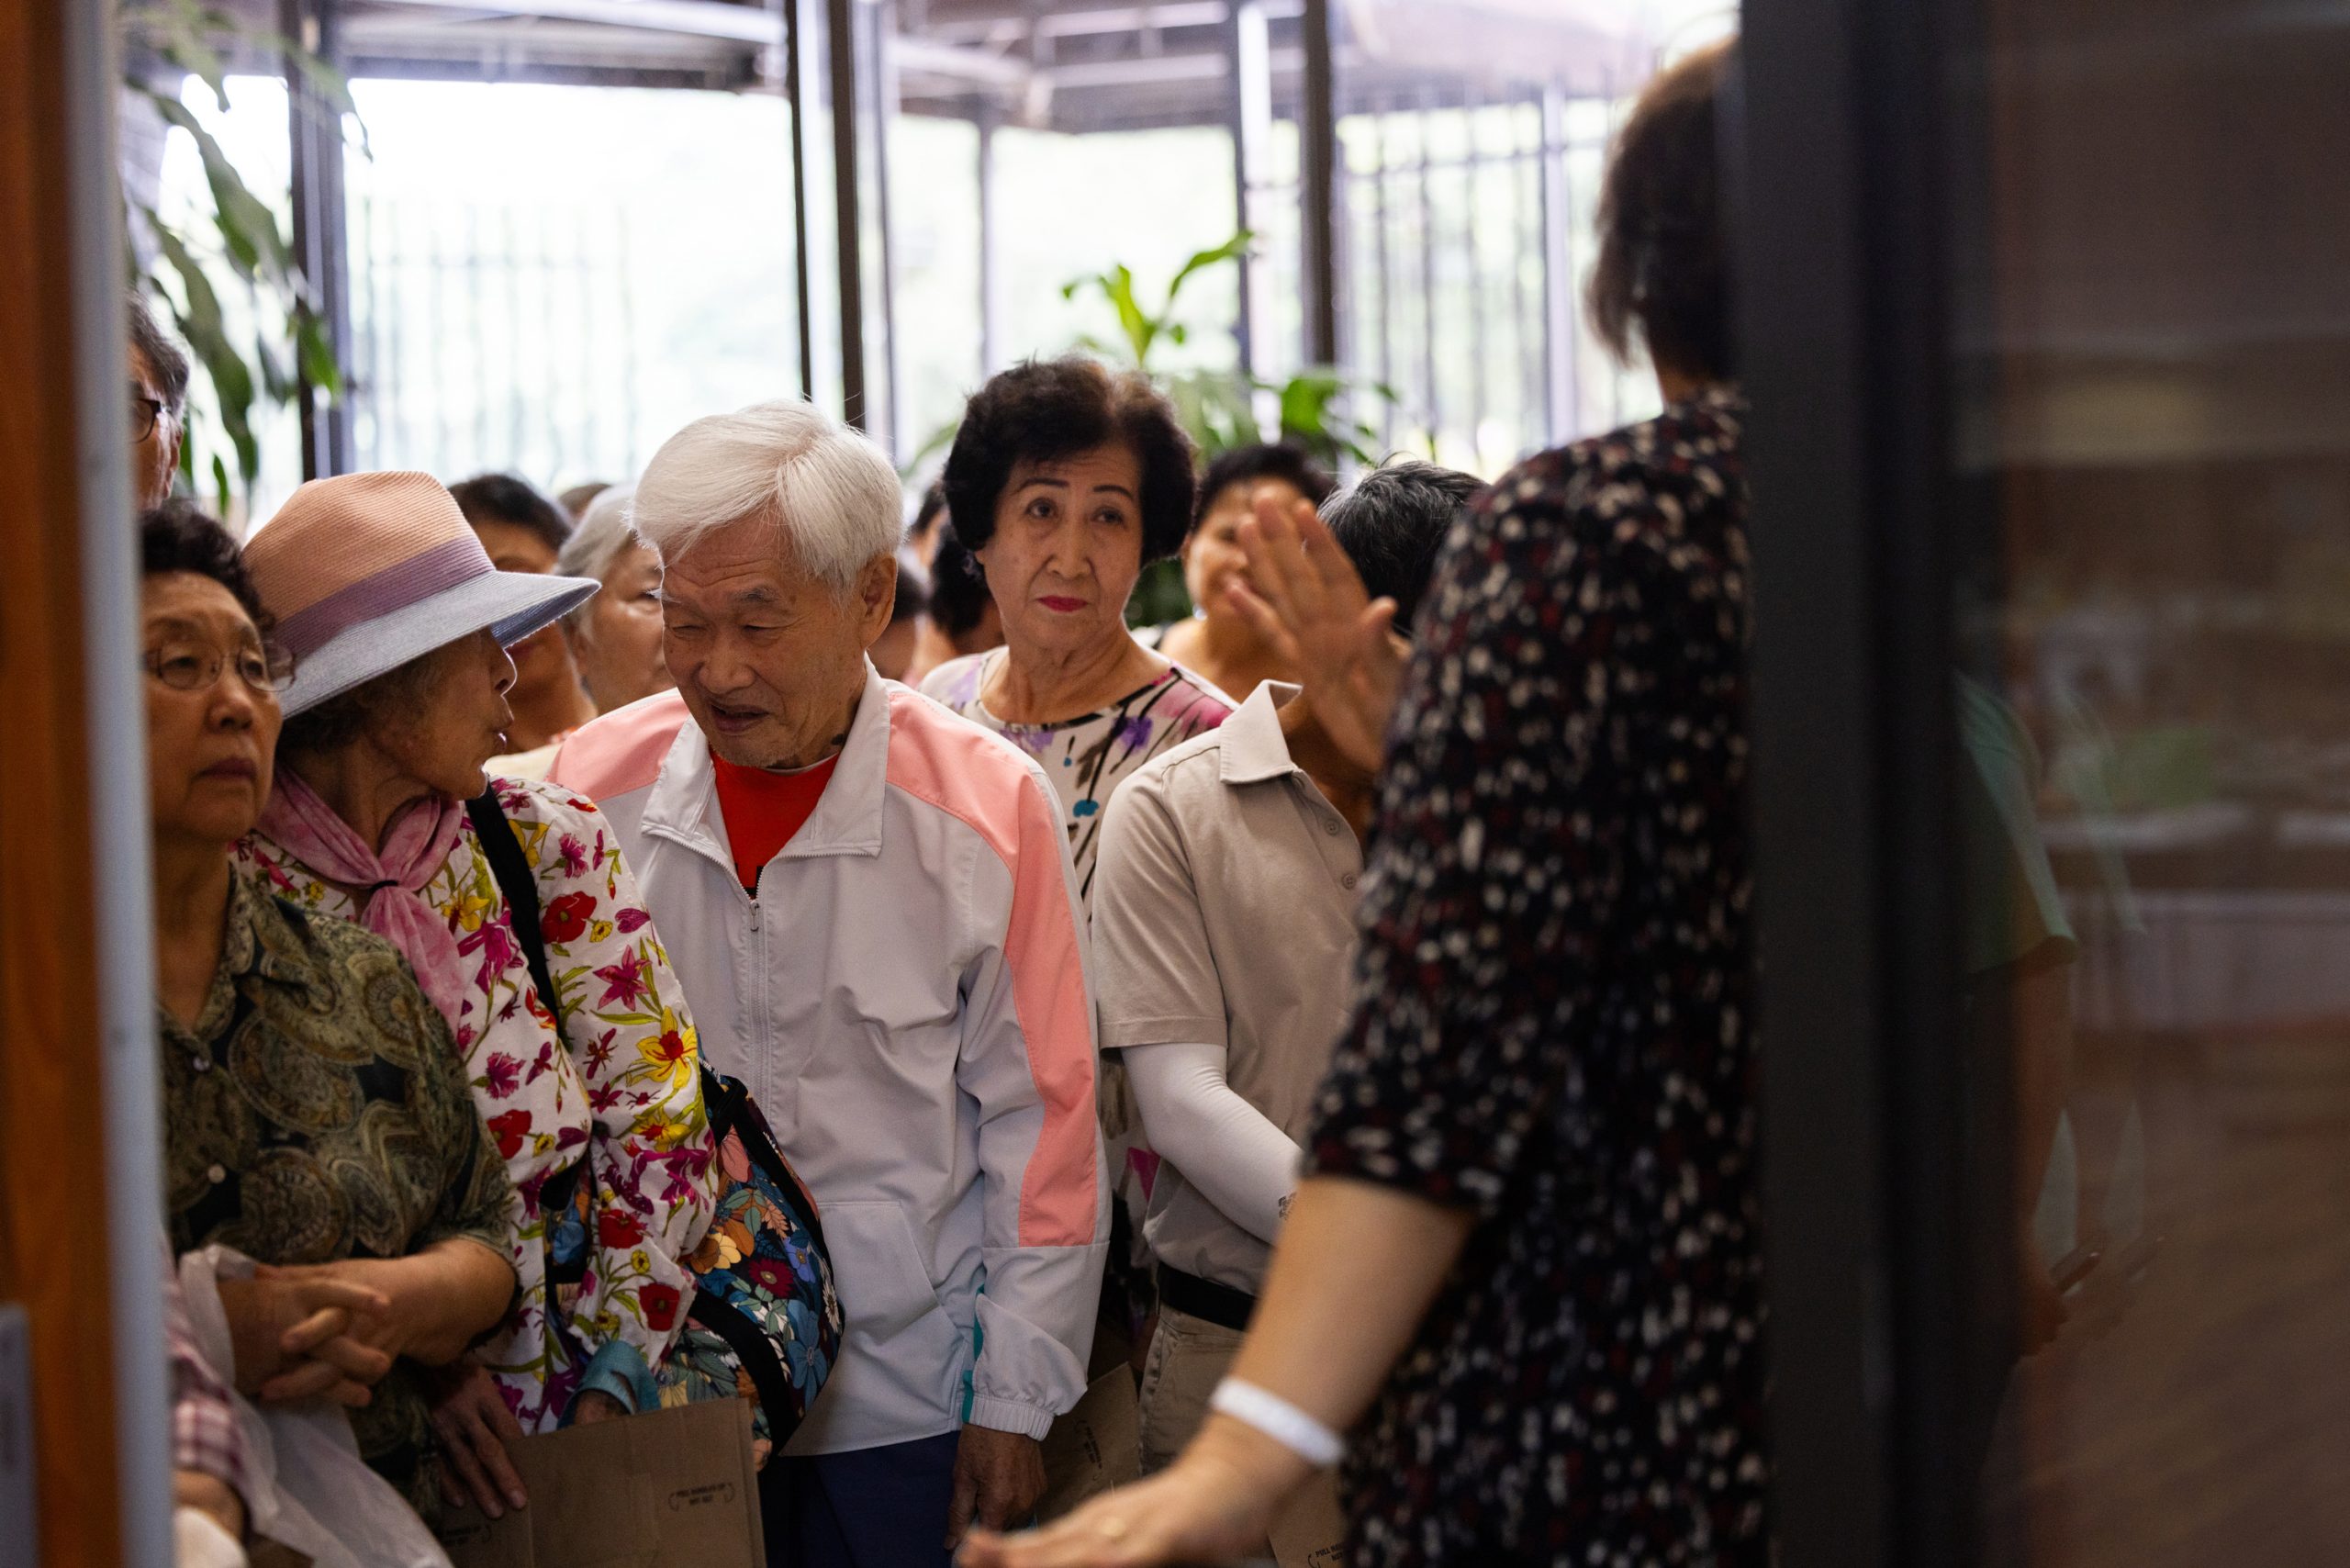 Members of the community wait for their turn to enter into a pop-up food distributing event at The Korean Community Center of Houston